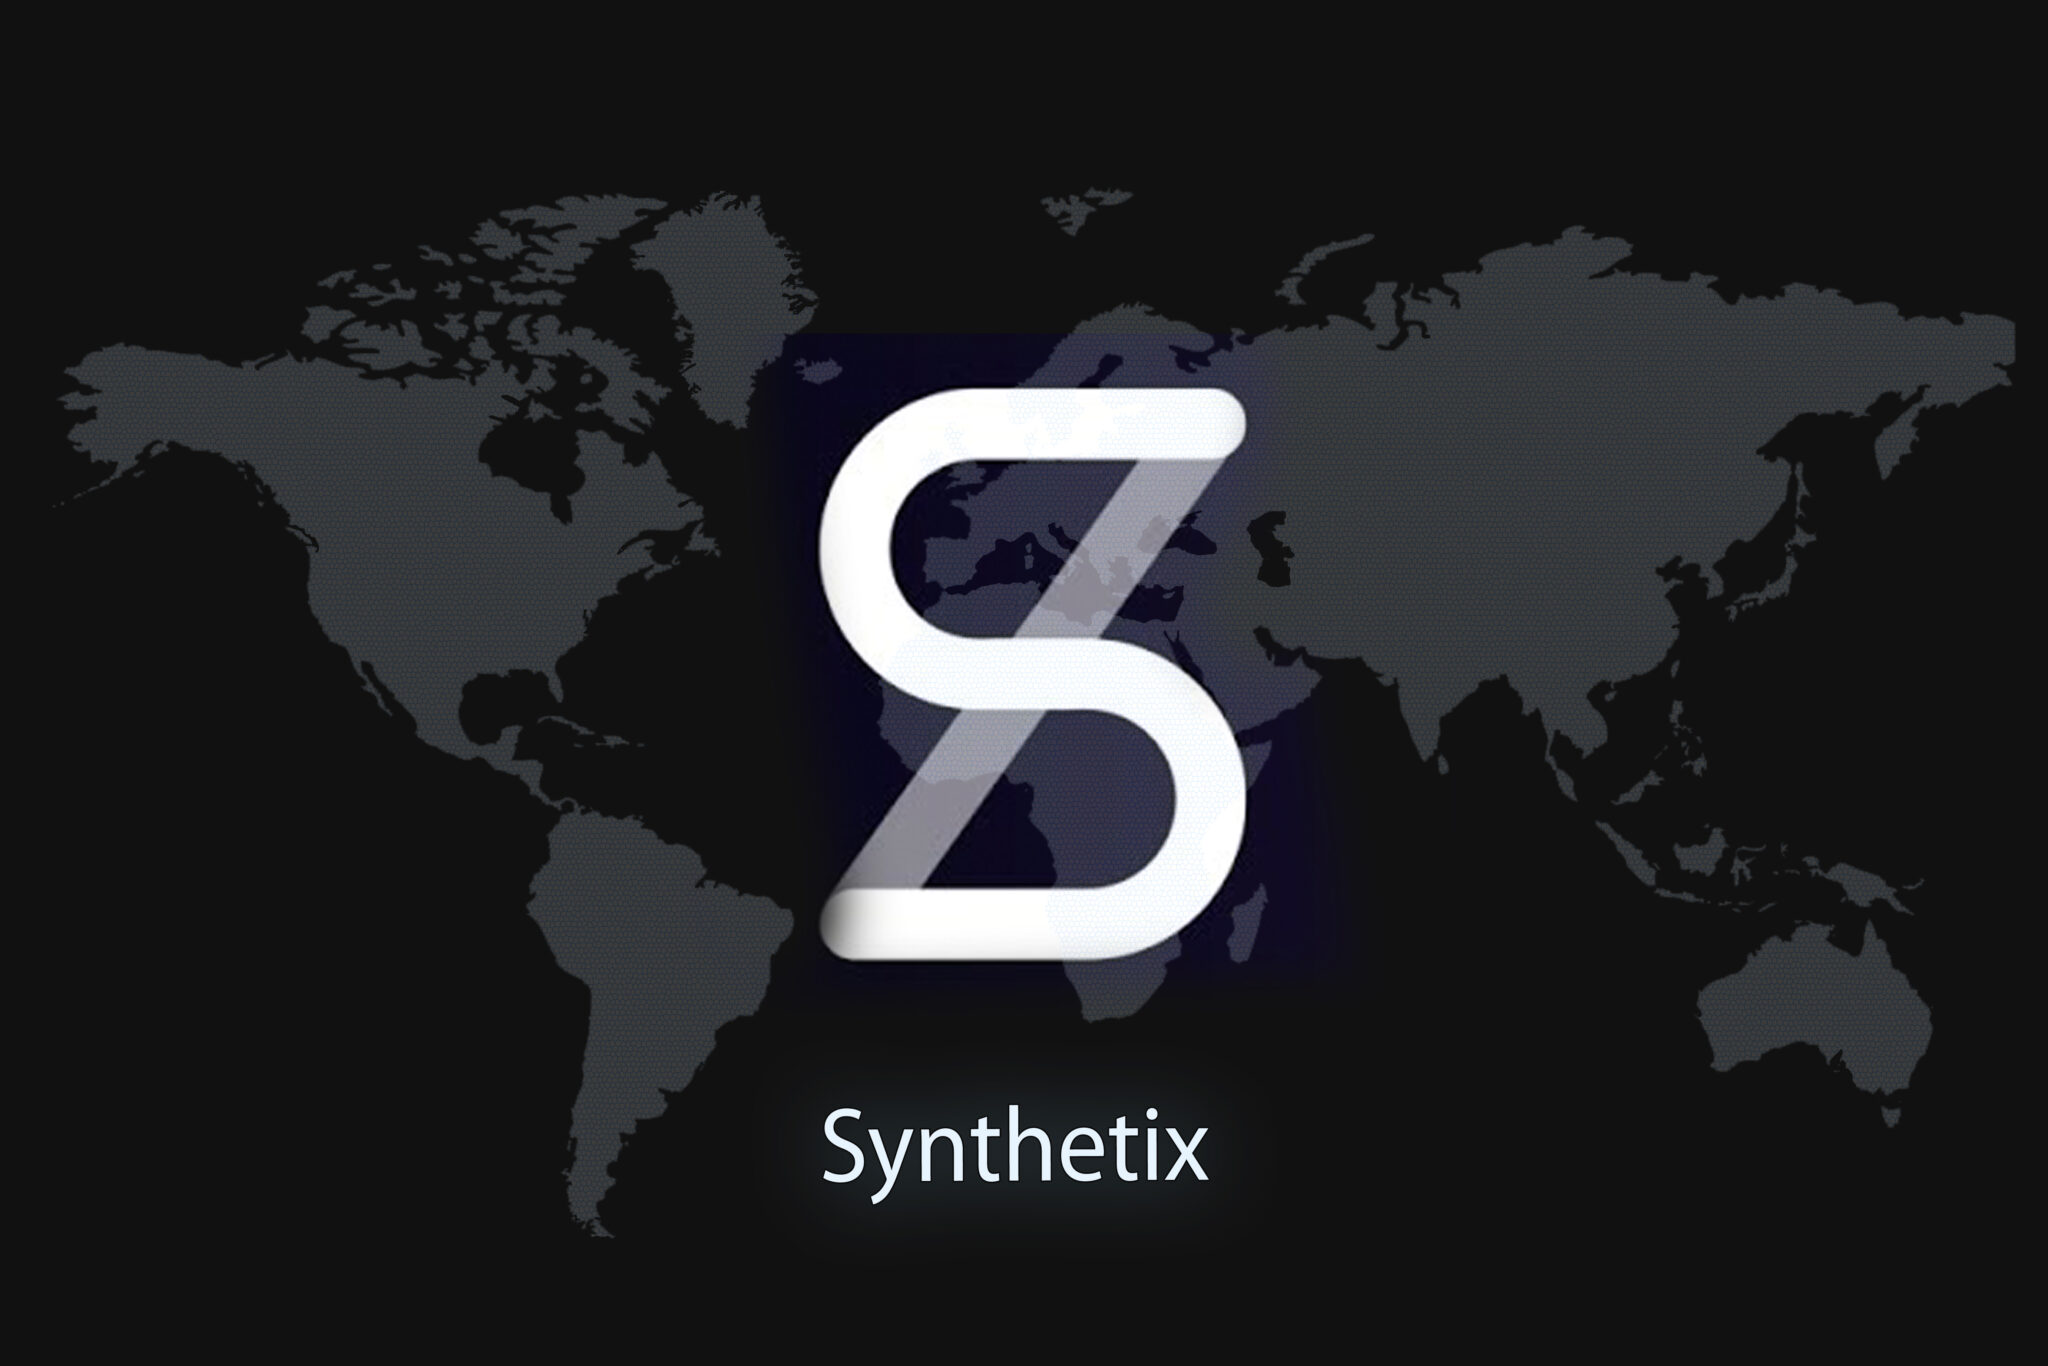 Synthetix Abstract Cryptocurrency. With a dark background and a world map. Graphic concept for your design.